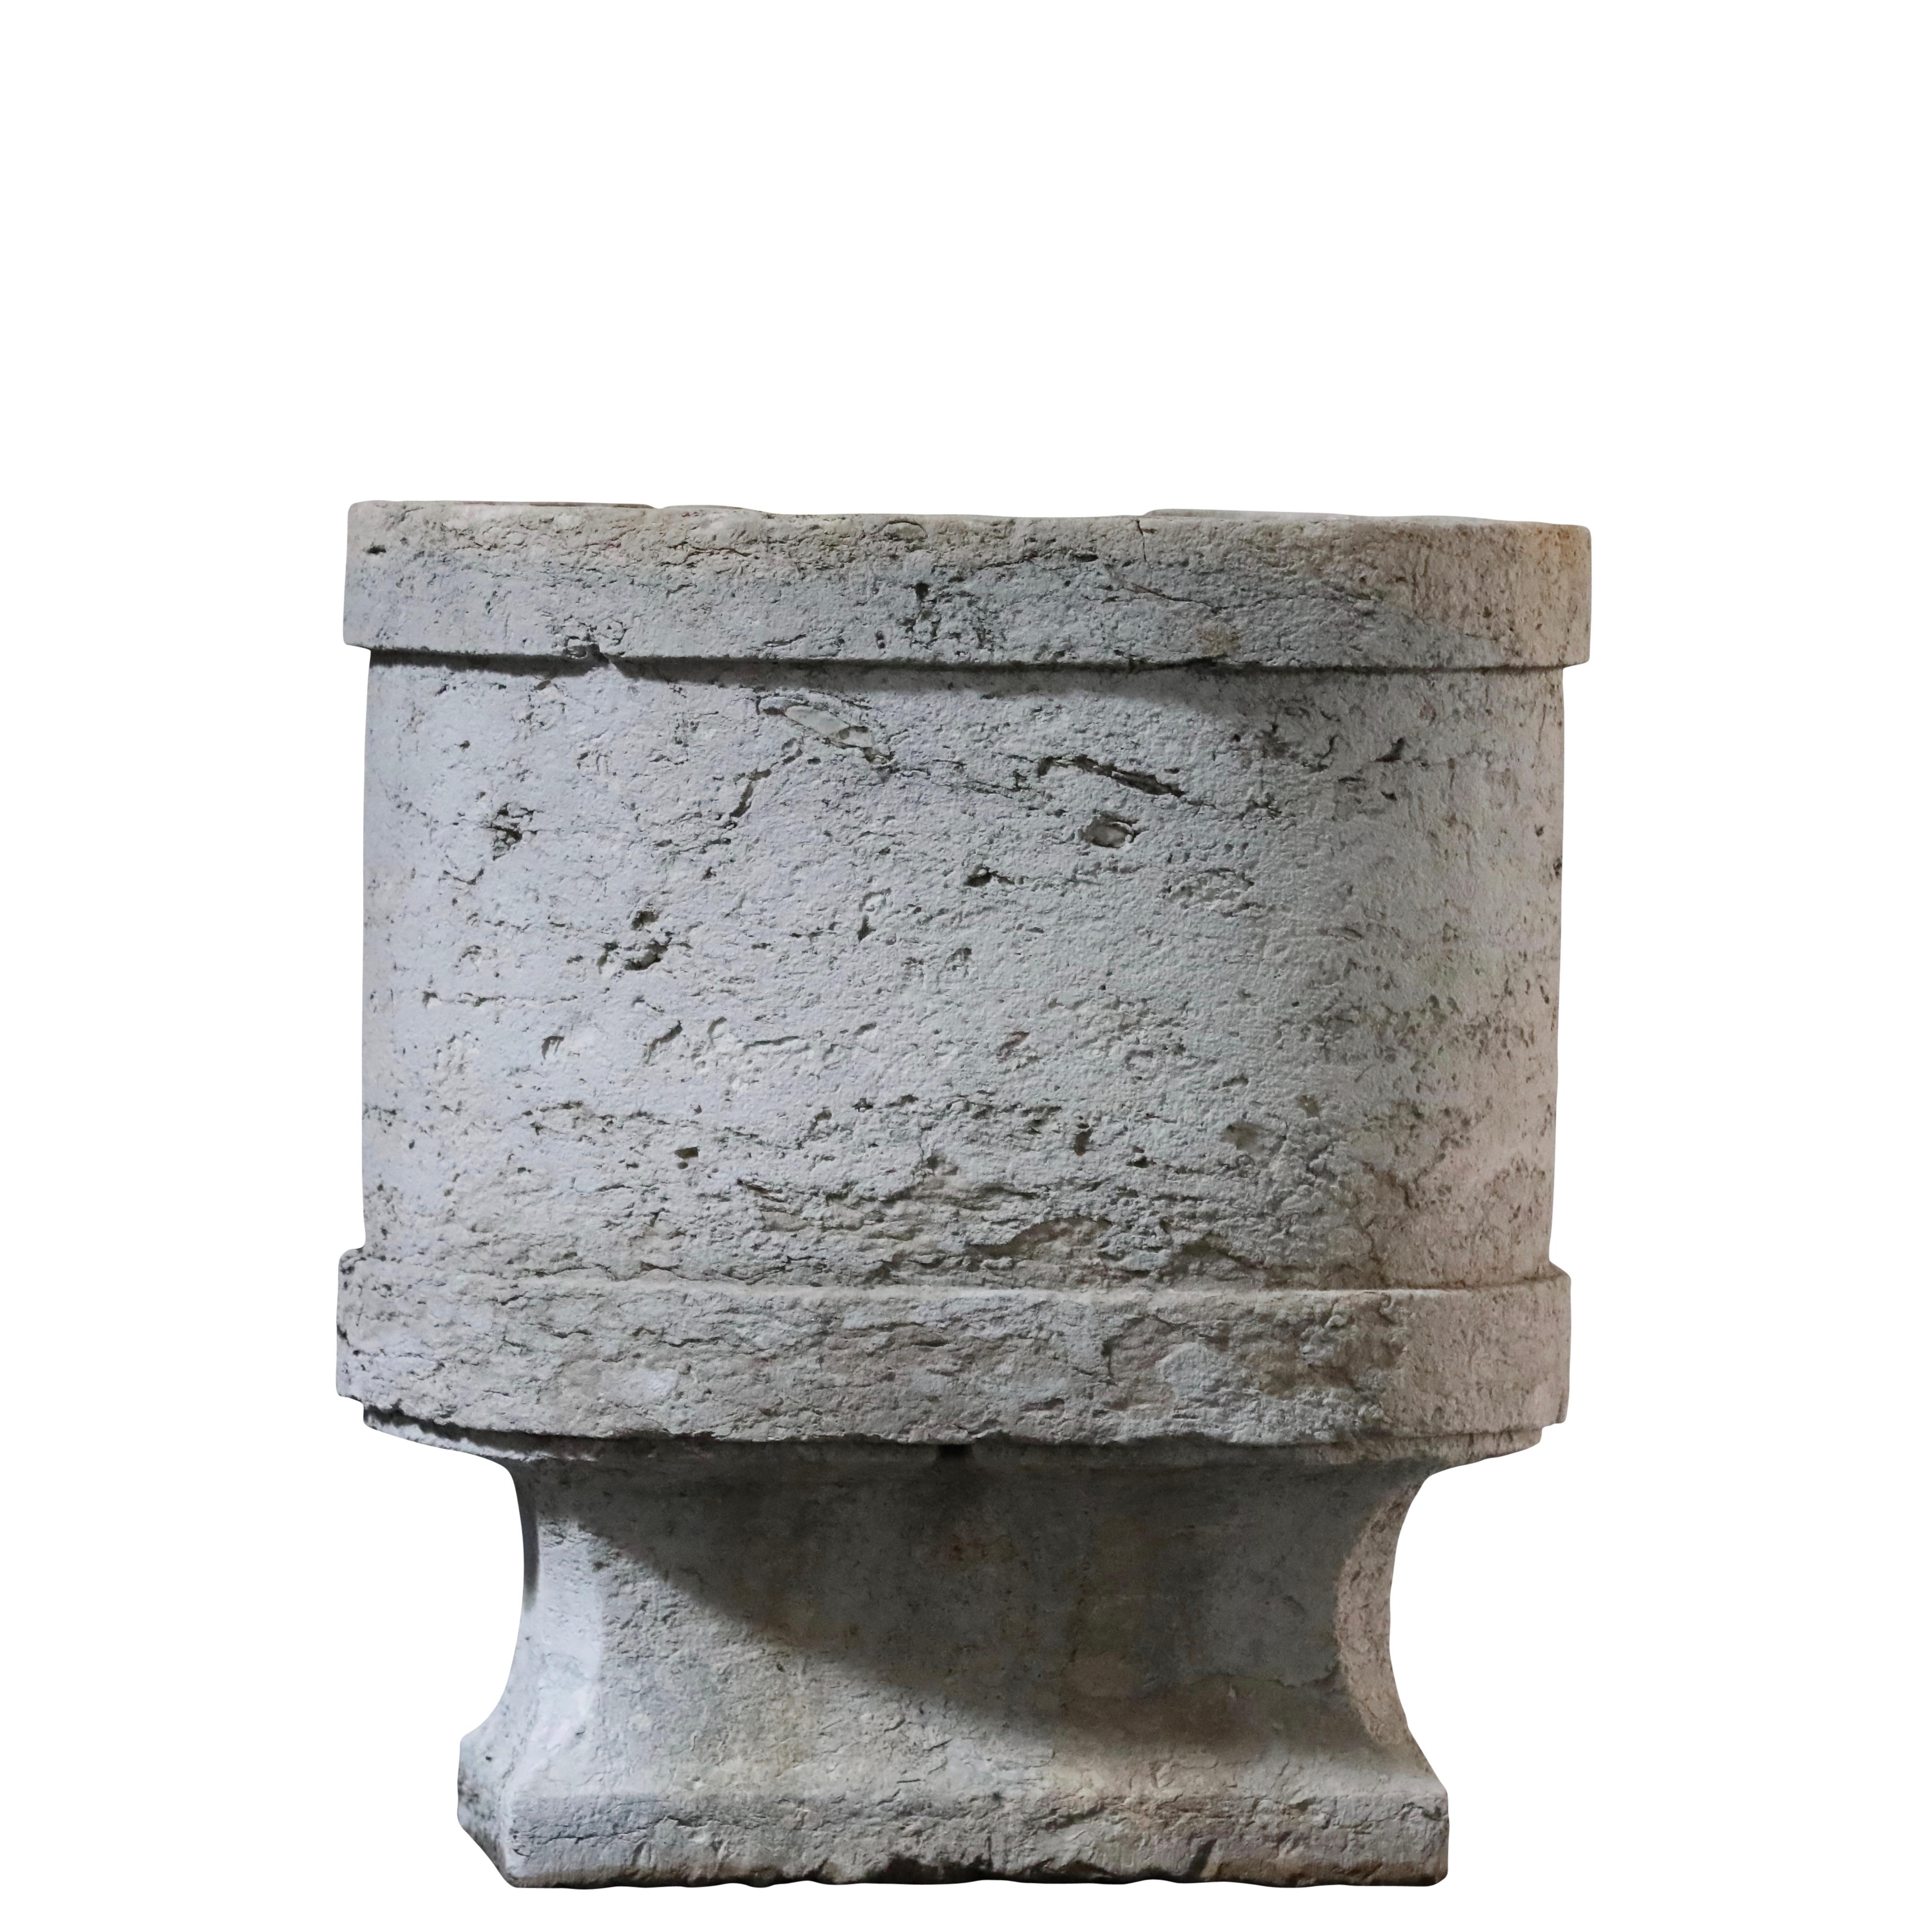 Formal French bicolor hard stone ice container. One in its kind. A great element to create a fountain, flower pot, hand washer or even to be used as wine cooler. A great original antique architectural outdoor element or garden ornament of the 18th